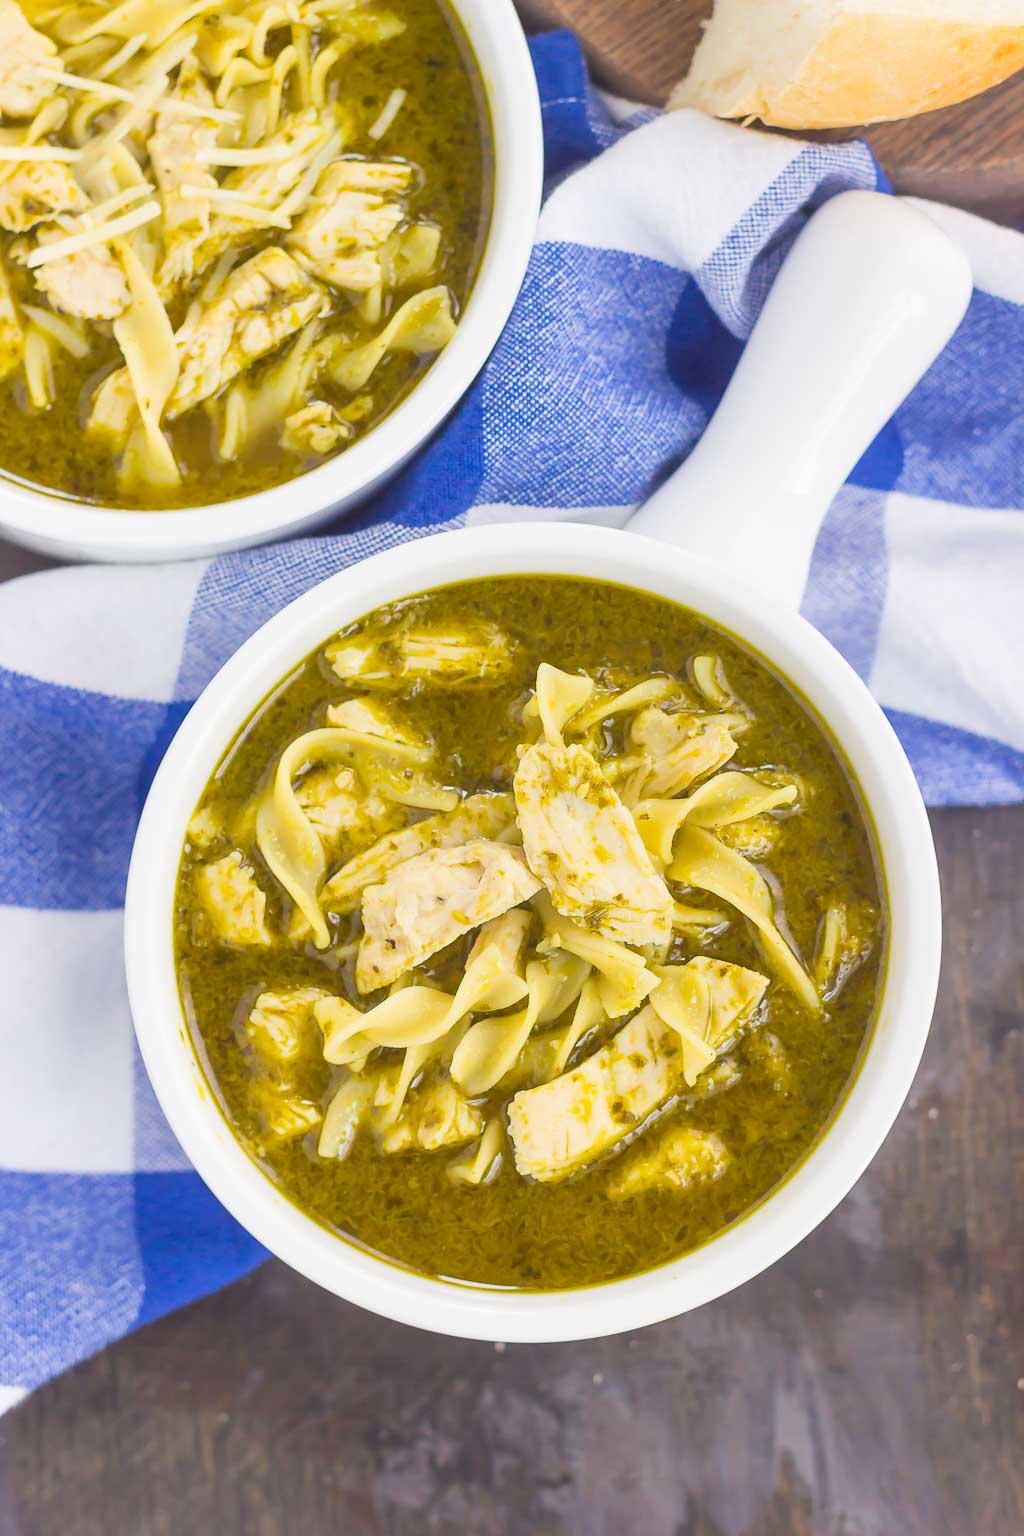 This Pesto Chicken Noodle Soup is made in one pot and ready in just 30 minutes! Filled with rotisserie chicken, tender noodles and enveloped in a simple pesto chicken broth, this easy dish is loaded with flavor and perfect for just about any time!